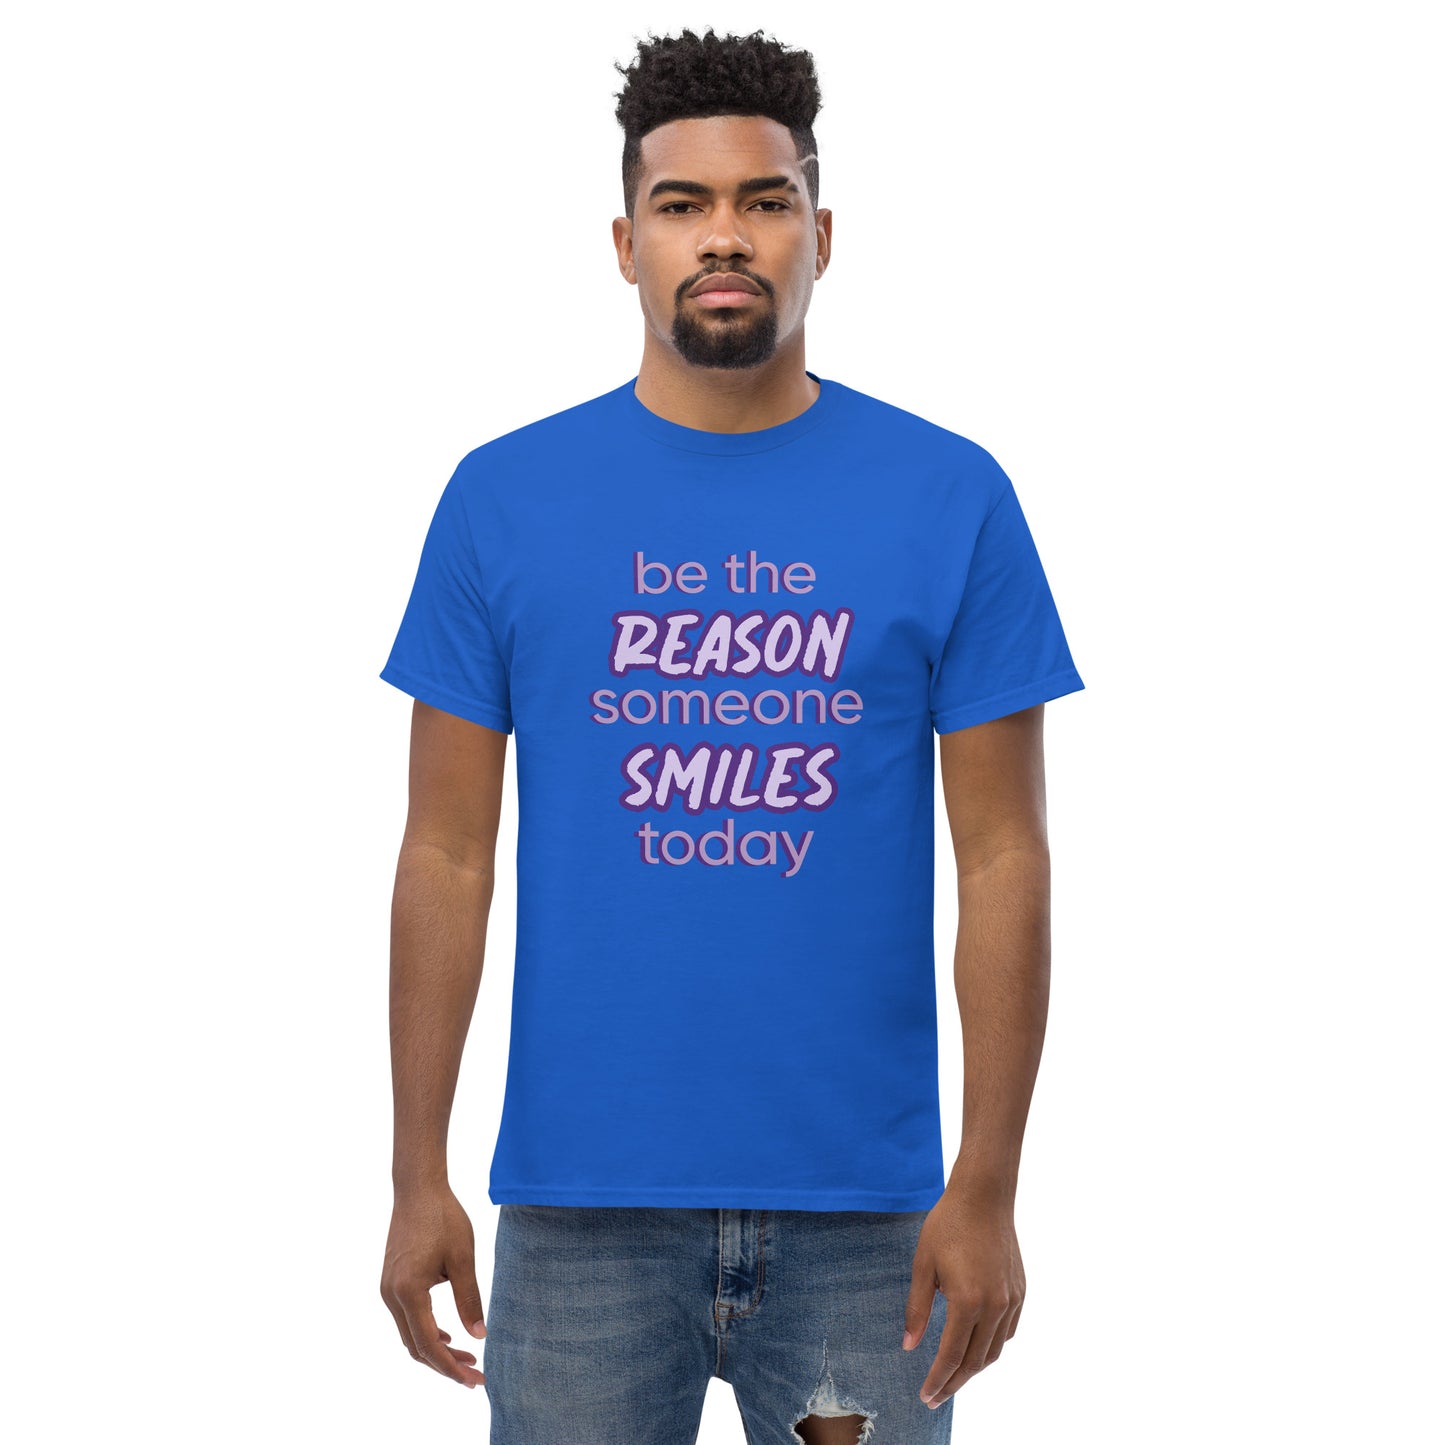 Men with royal blue T-shirt and the quote "be the reason someone smiles today" in purple on it. 